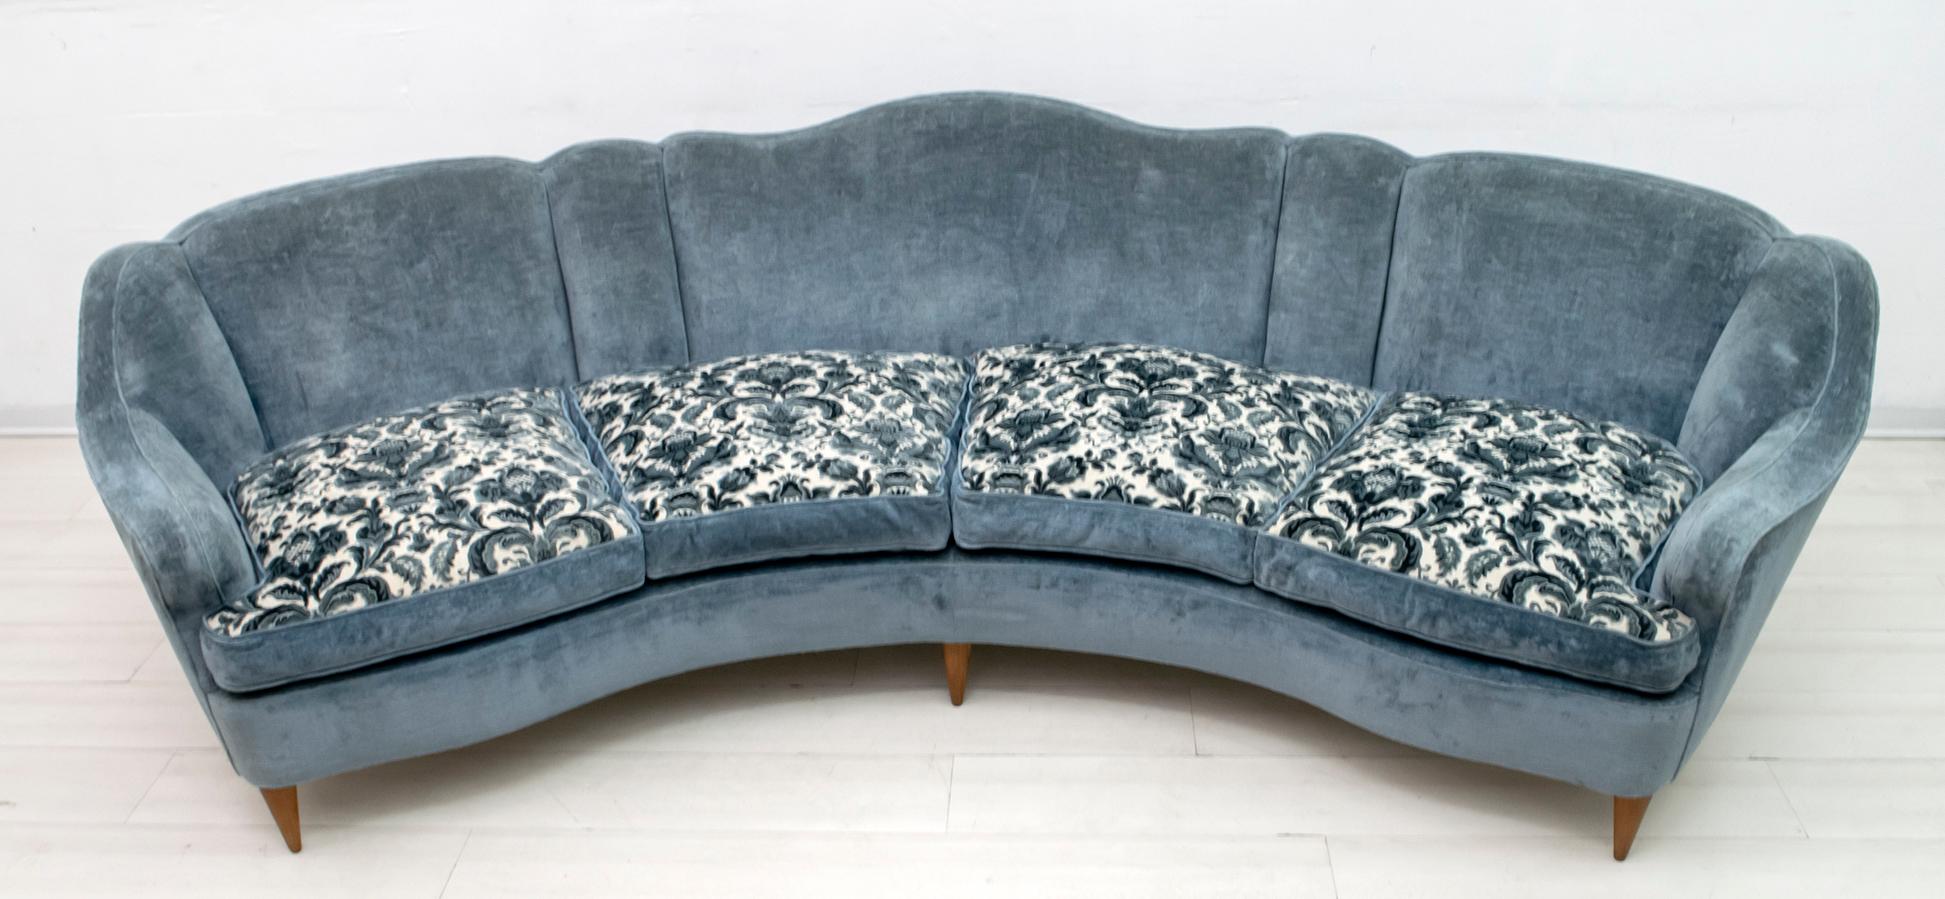 Curved design sofa, original velvet upholstery, the upholstery is in good condition, the cushions, as in the photos, are double sided in velvet and textured velvet, the structure is in fir and beech wood, in excellent condition, no structural